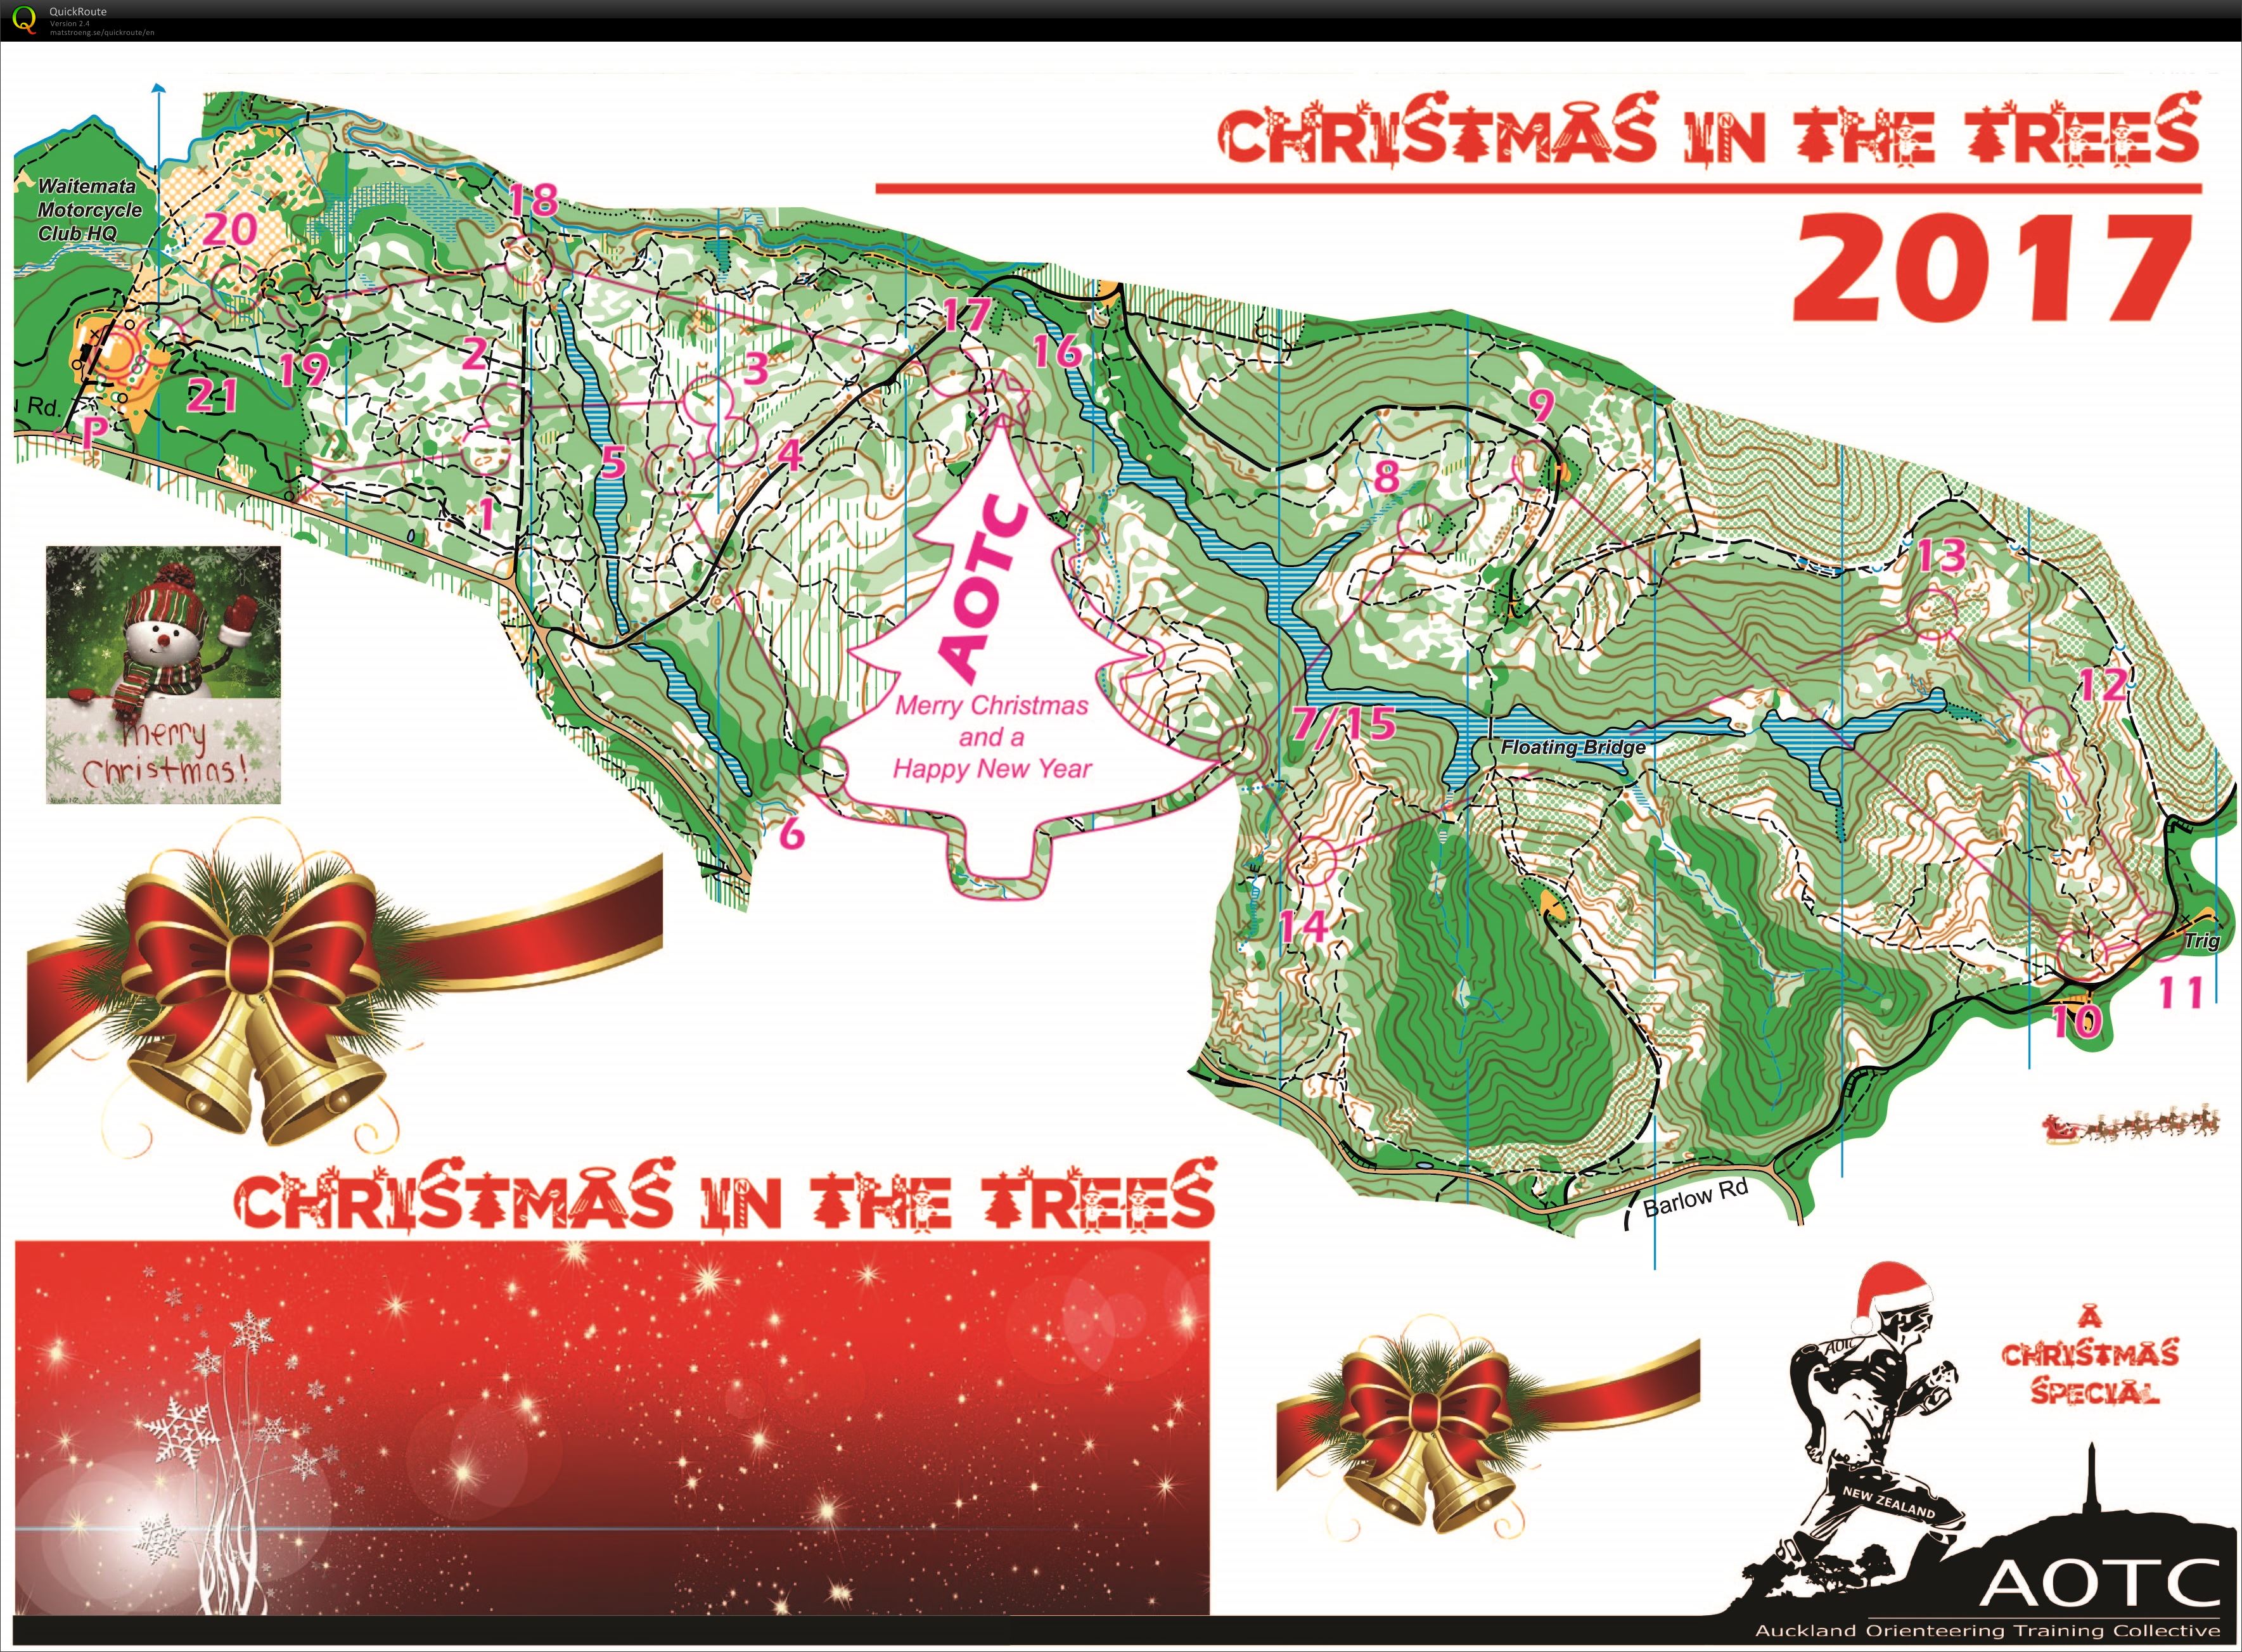 Christmas in the Trees 2017 (16.12.2017)